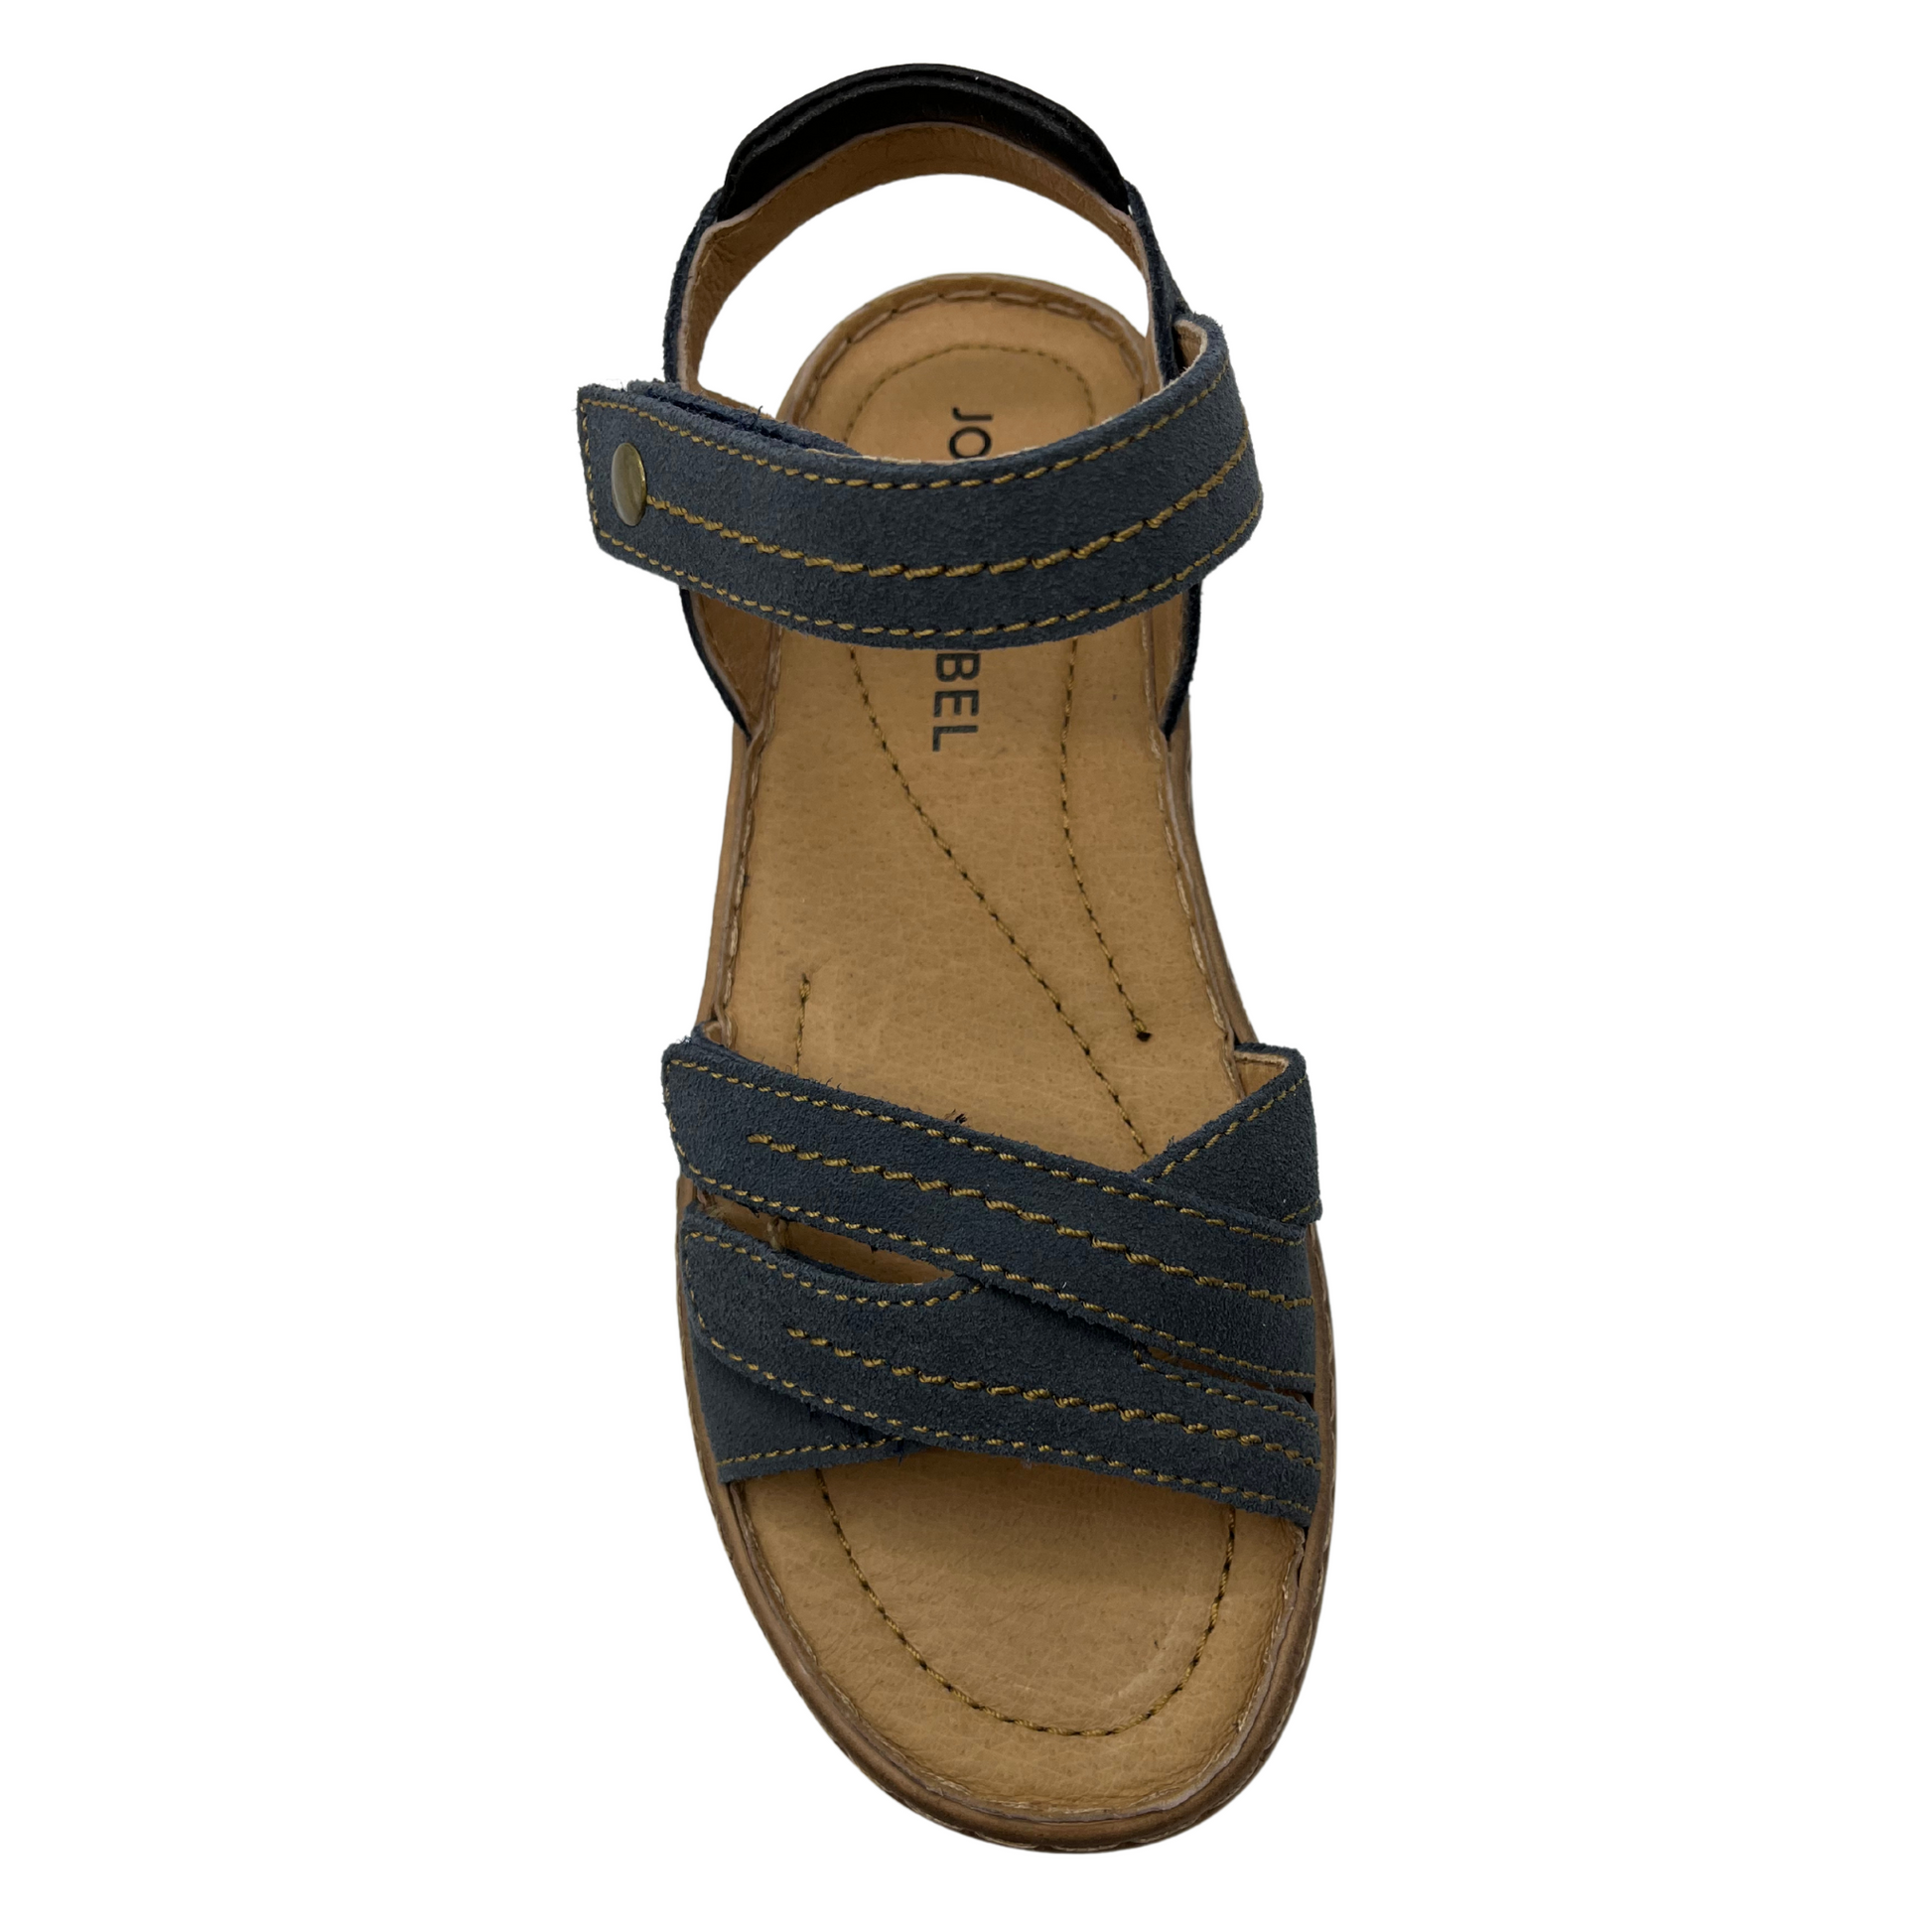 Top view of navy leather suede sandal with multiple adjustable straps and open toe